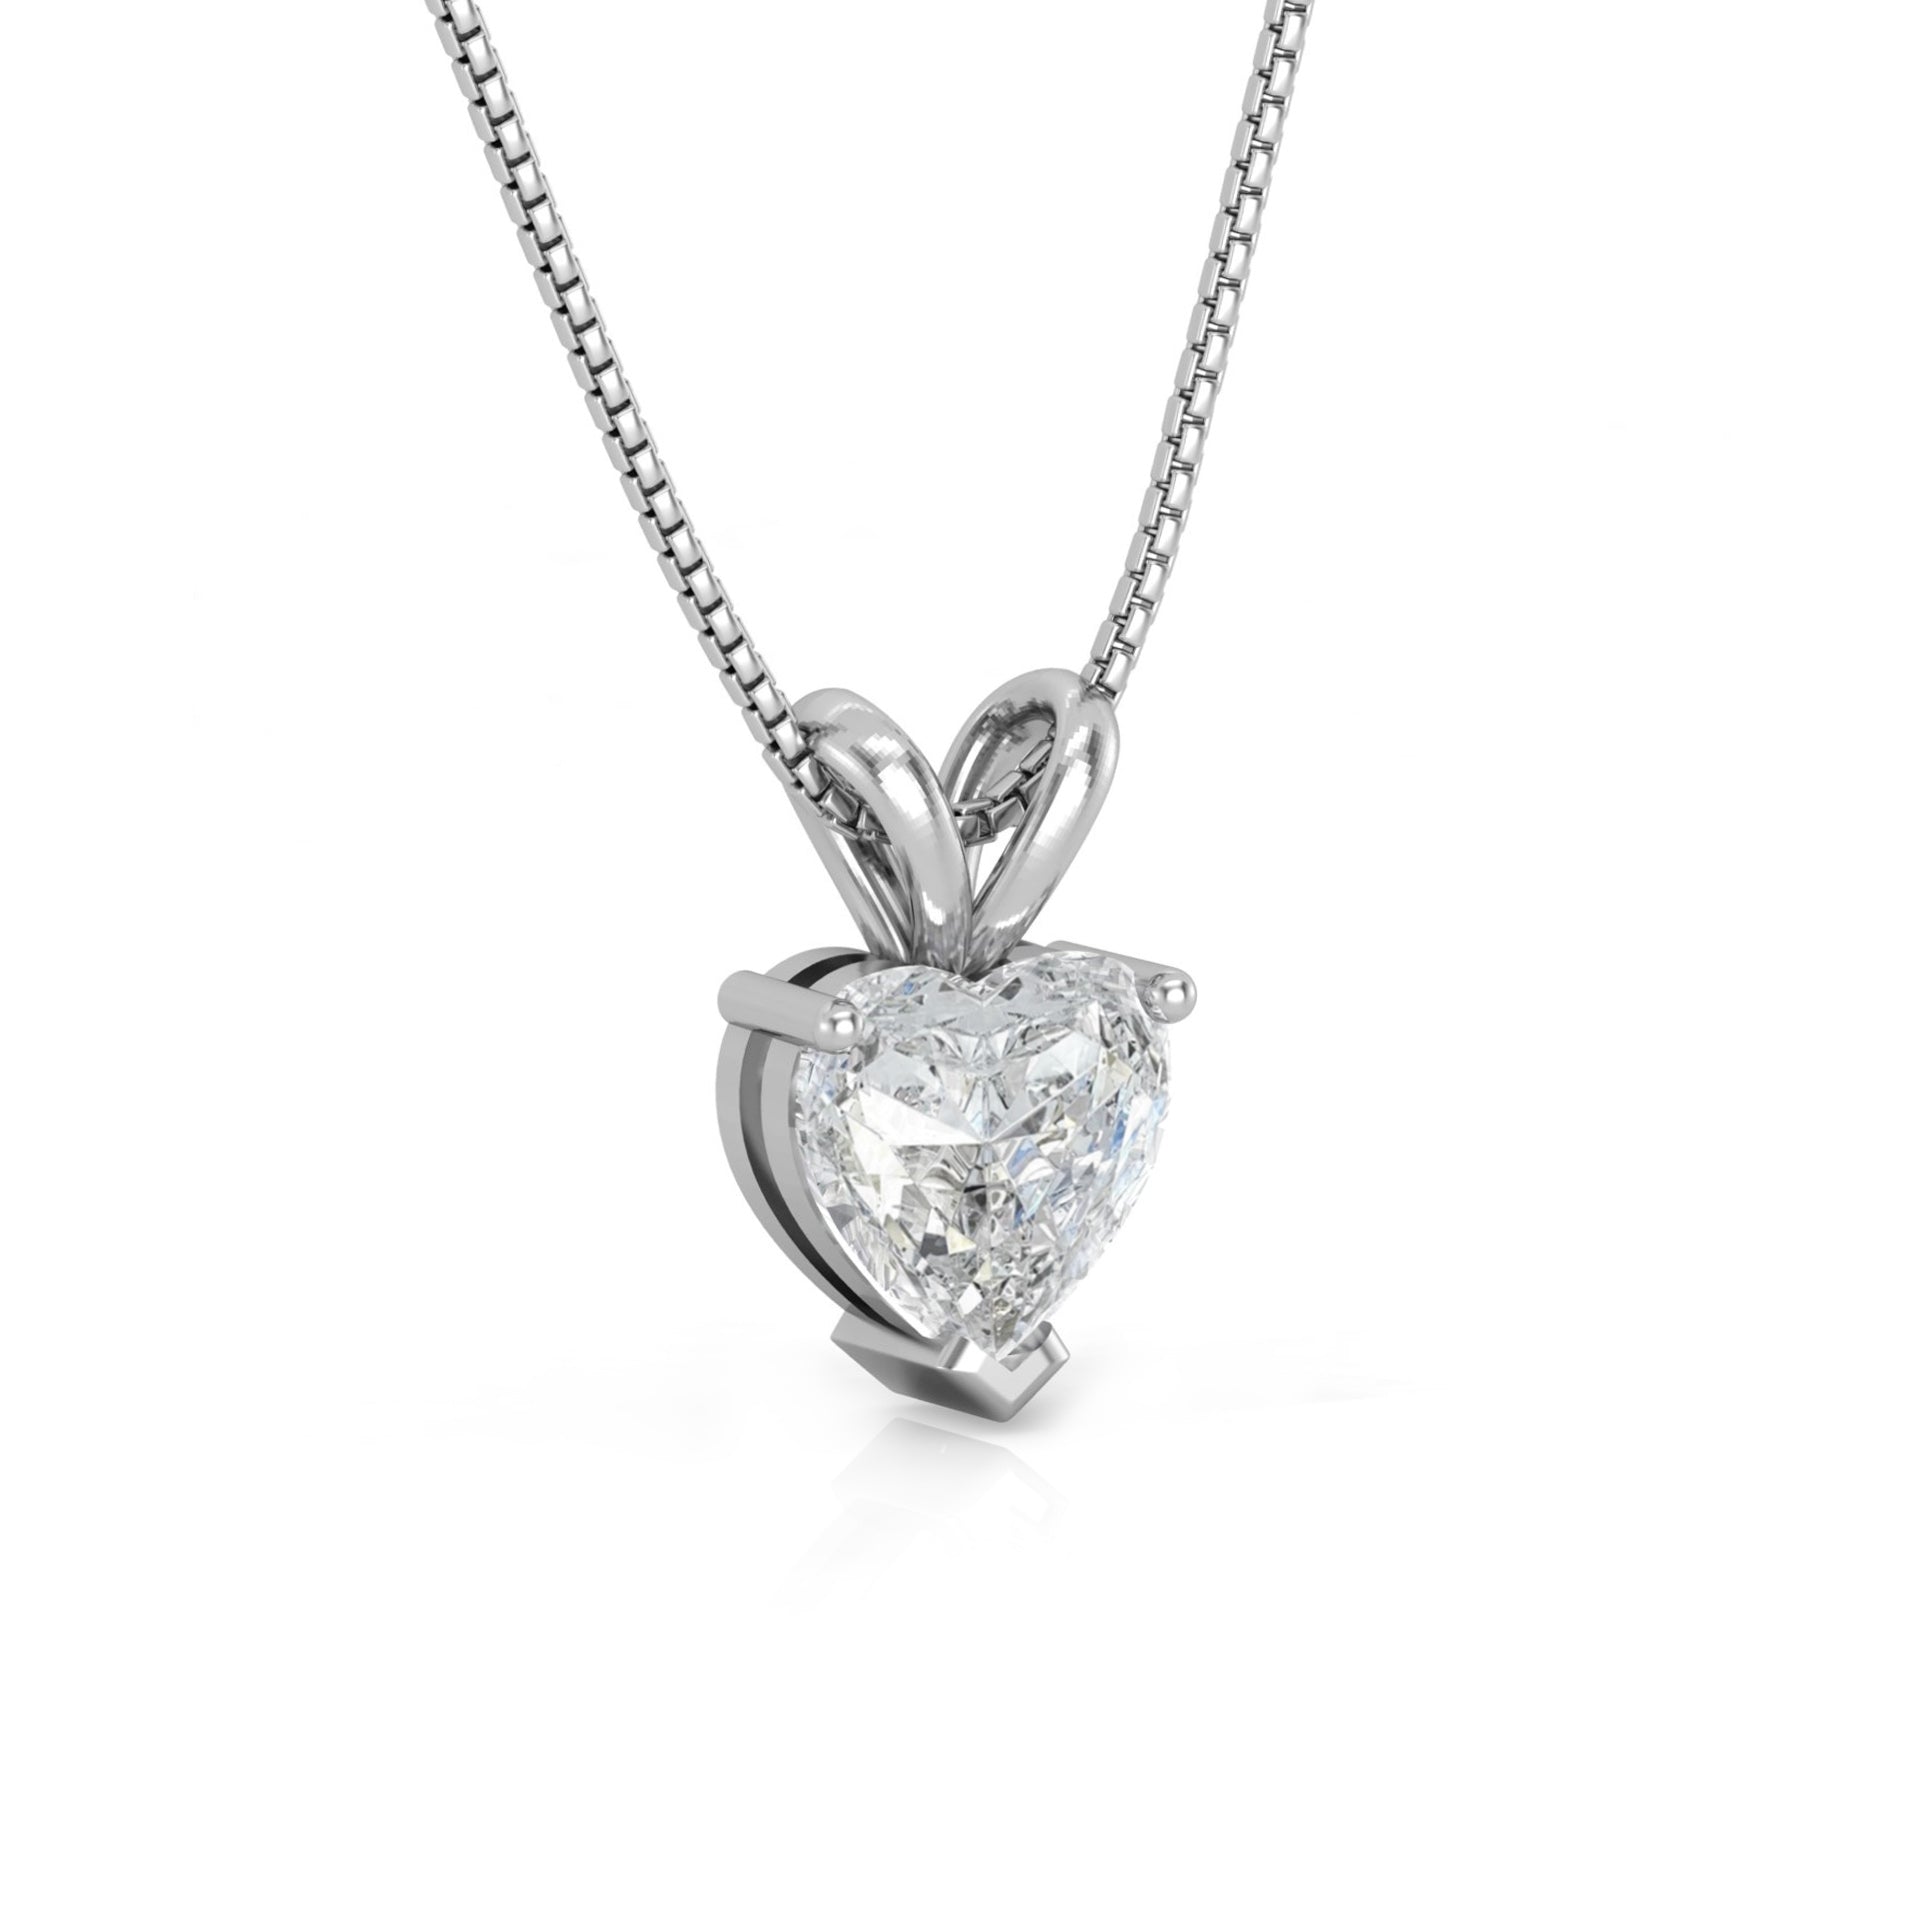 Buy the Silver Enchanted Heart Pendant with Chain - Silberry